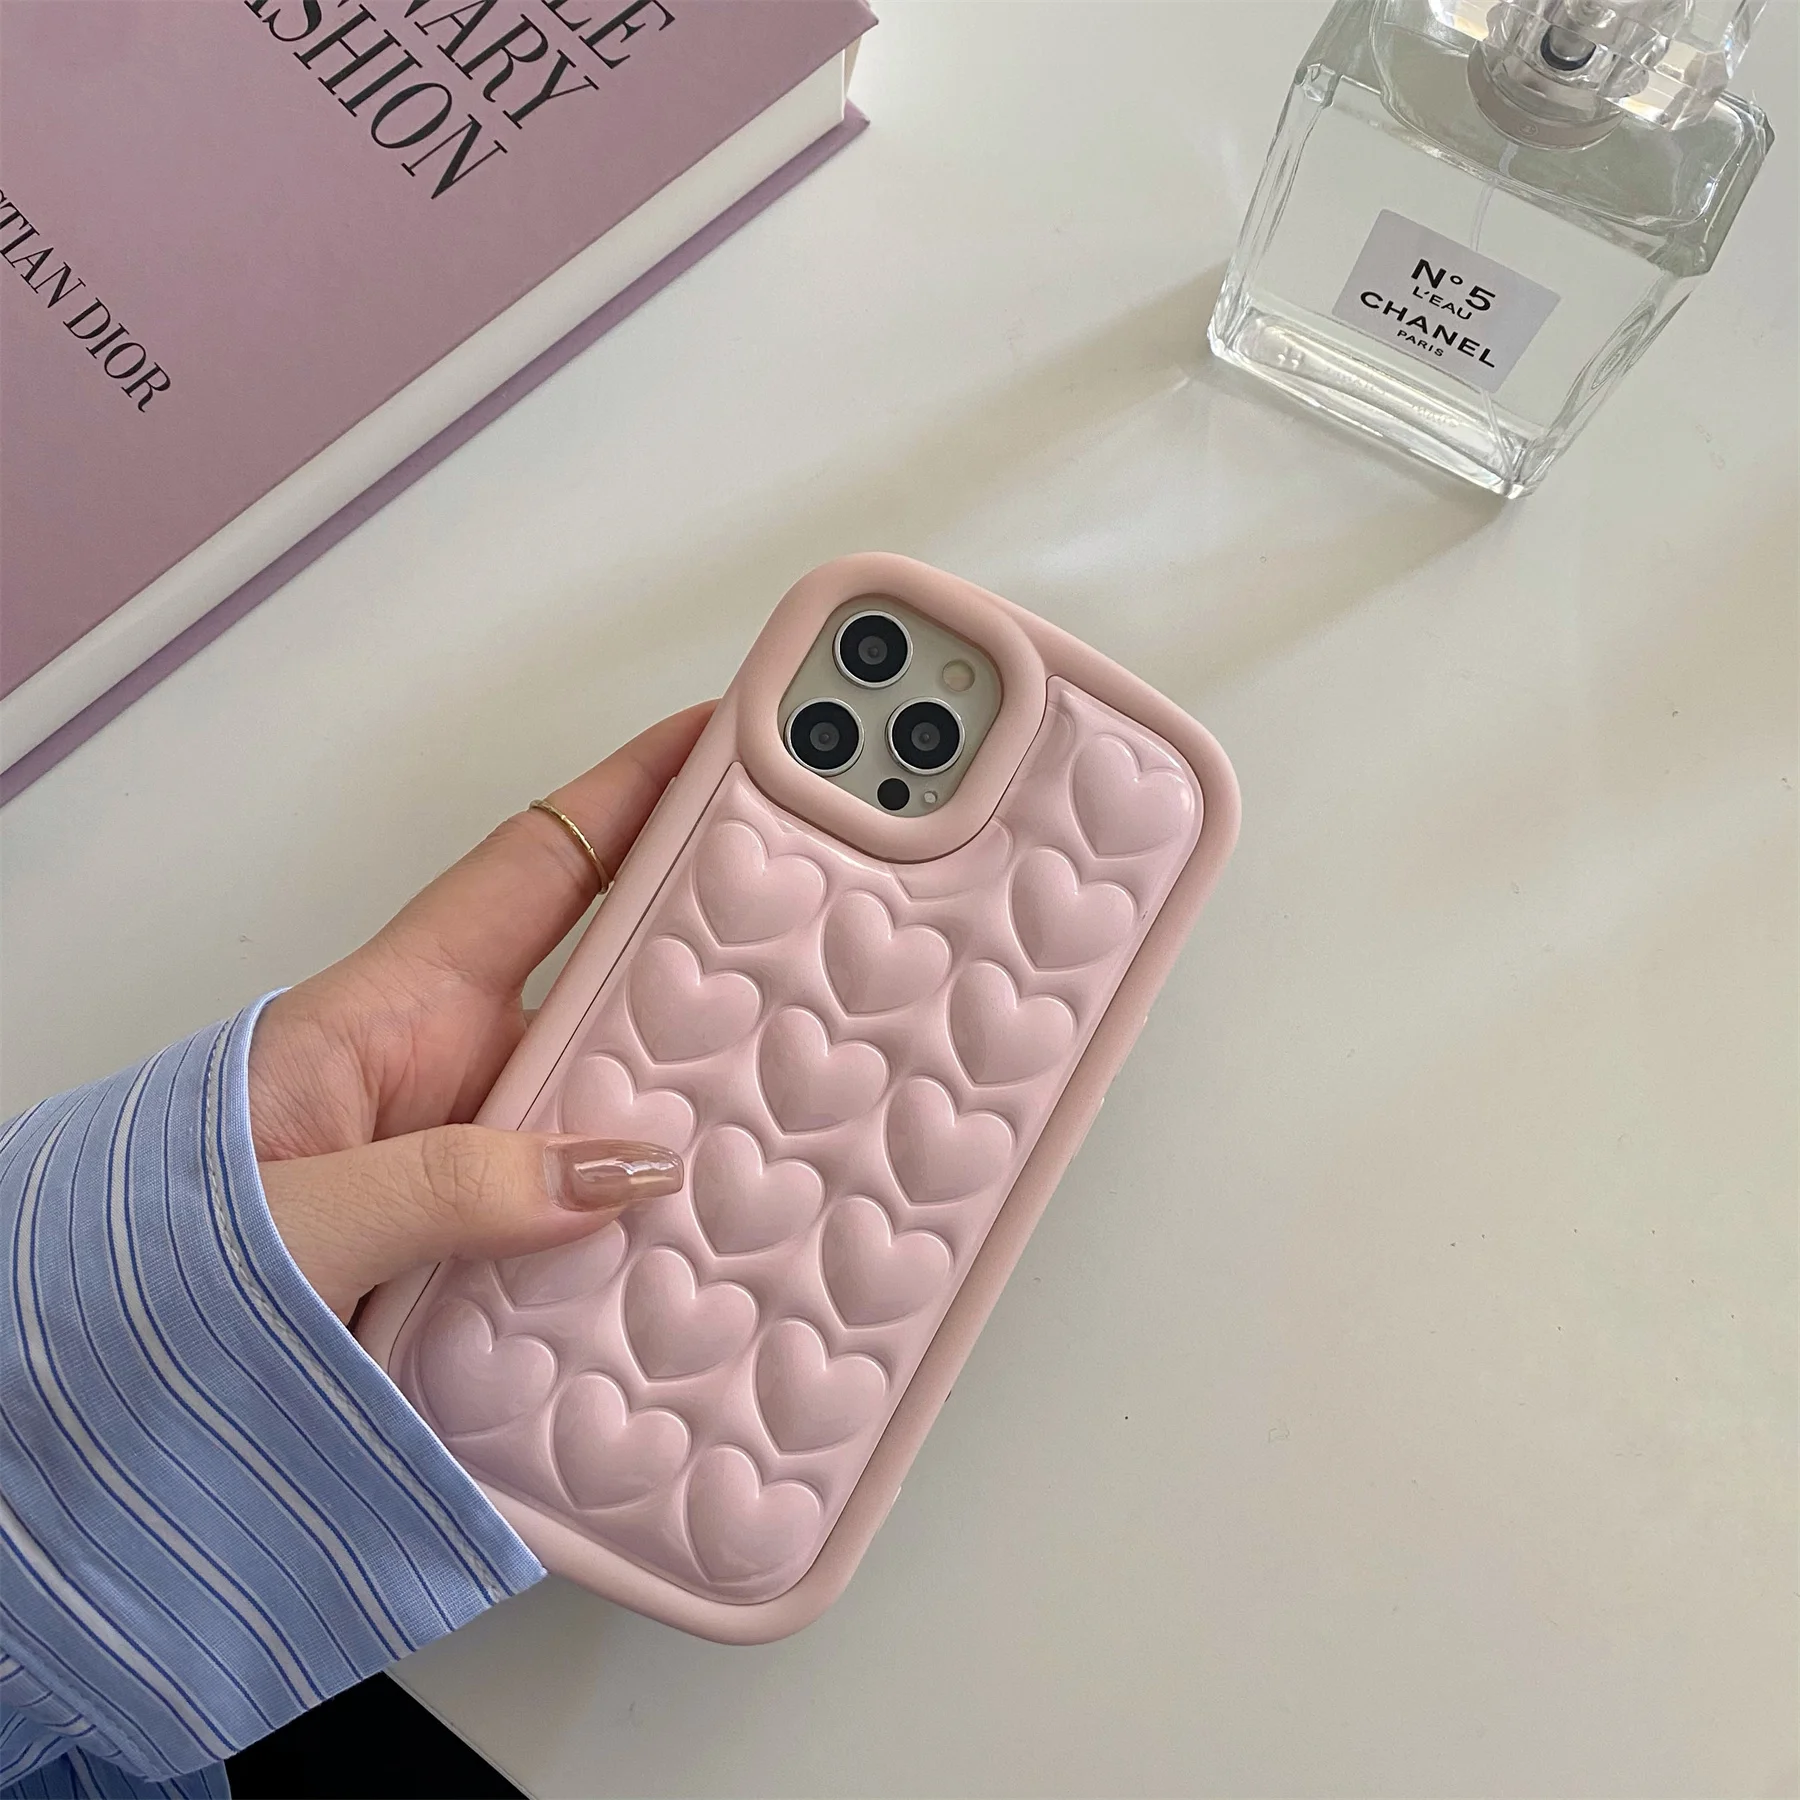 chanel phone case iphone 11 pro max